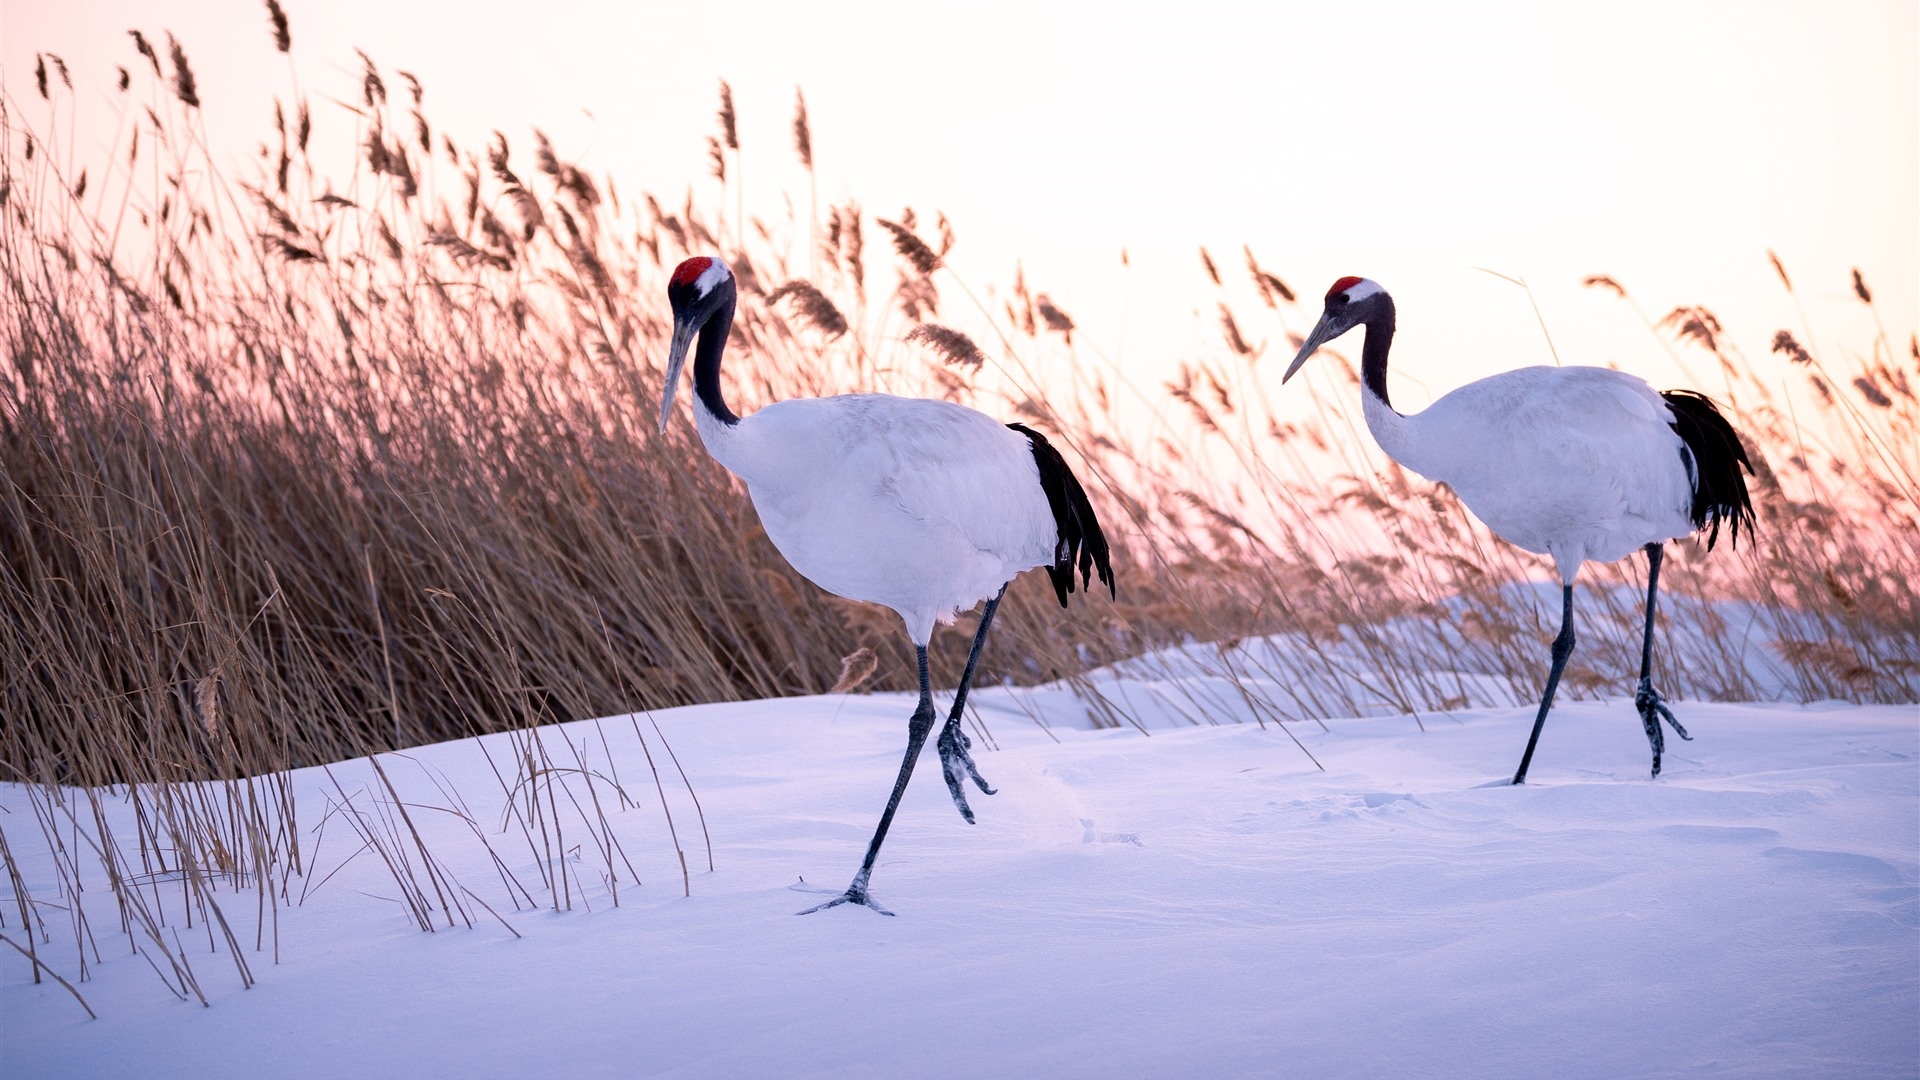 Snow red crowned crane, Winter beauty, Cold climate, Majestic bird, 1920x1080 Full HD Desktop